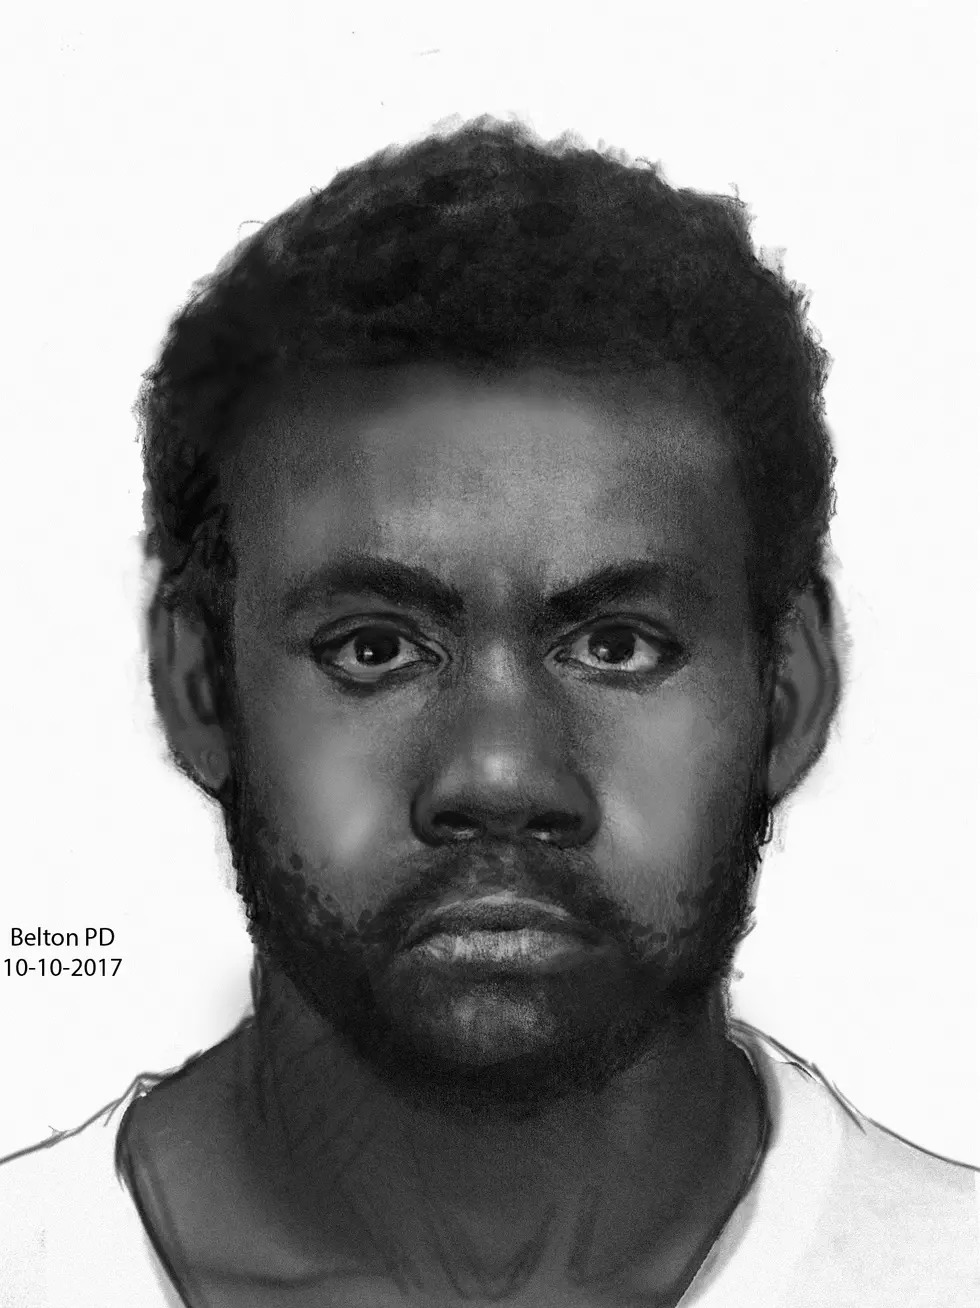 Have You Seen This Man? Belton Police Release Sketch Of Suspect In Fatal Shooting